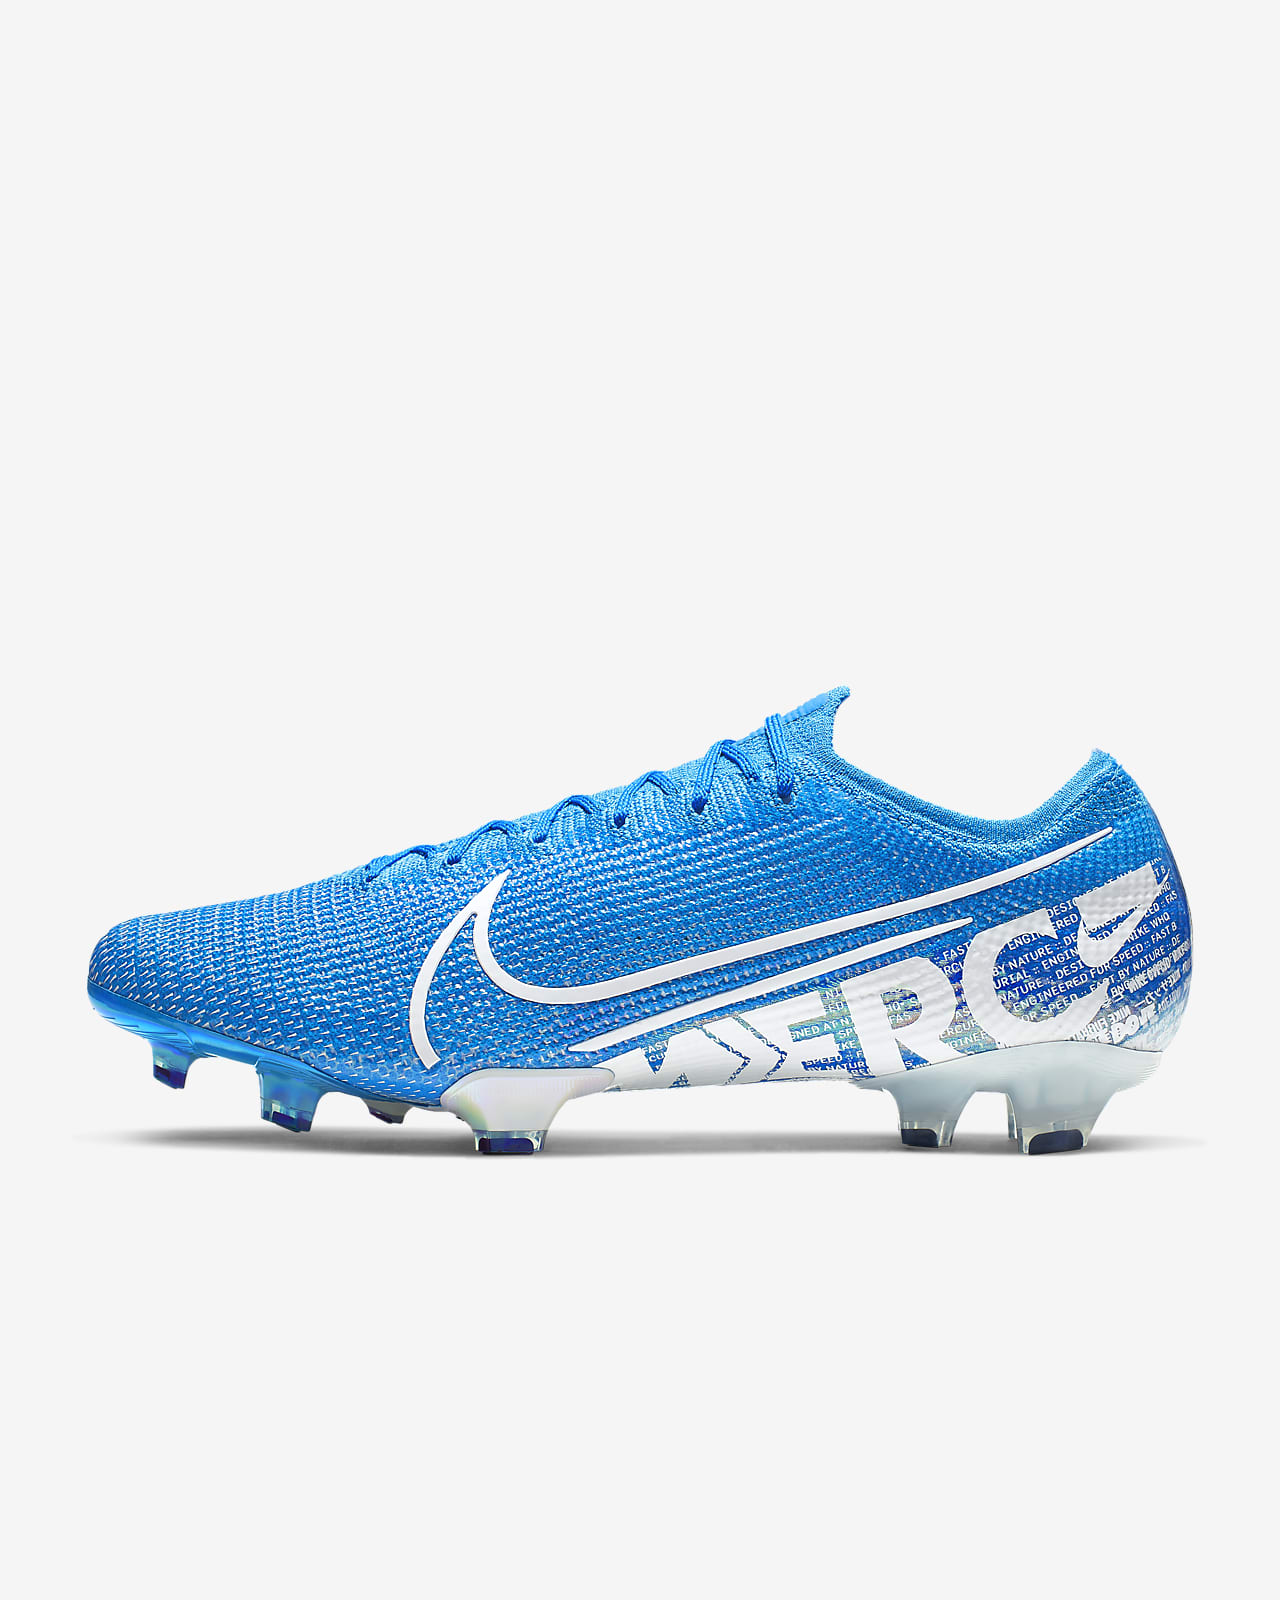 Humedad sin cable prioridad Nike Mercurial Vapor 13 Elite FG Firm-Ground Soccer Cleat. Nike.com